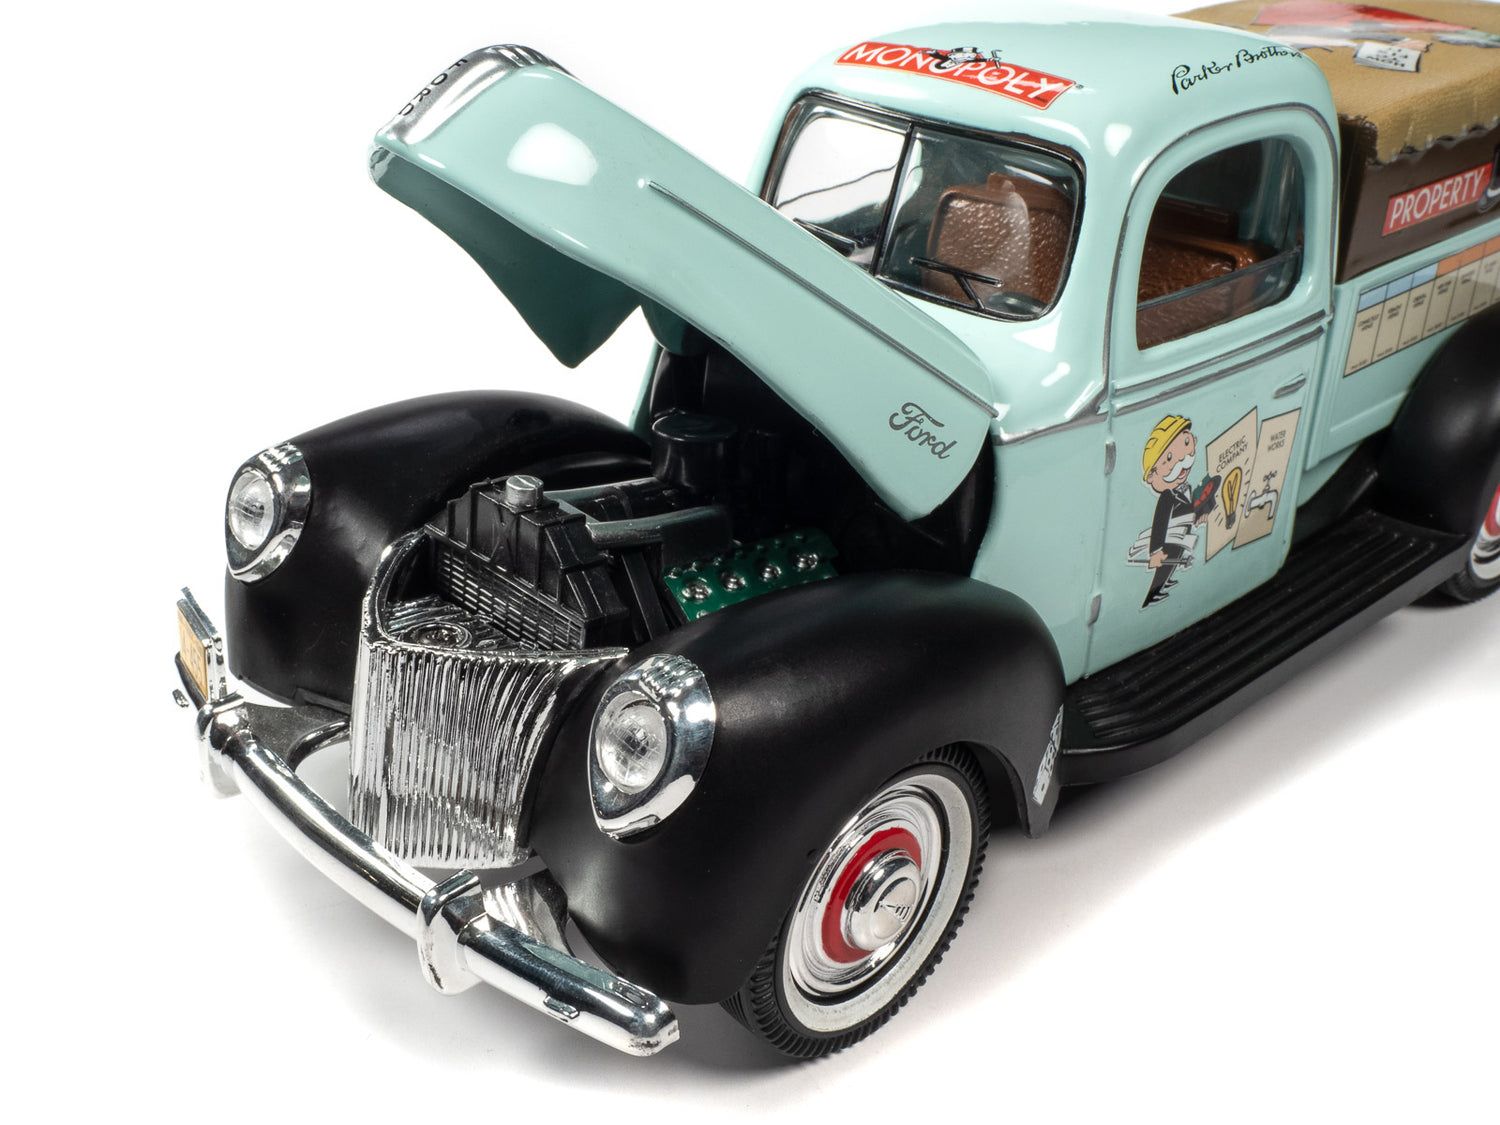 Auto World Monopoly 1940 Ford Property Management Truck w/Resin Figure 1:18 Scale Diecast